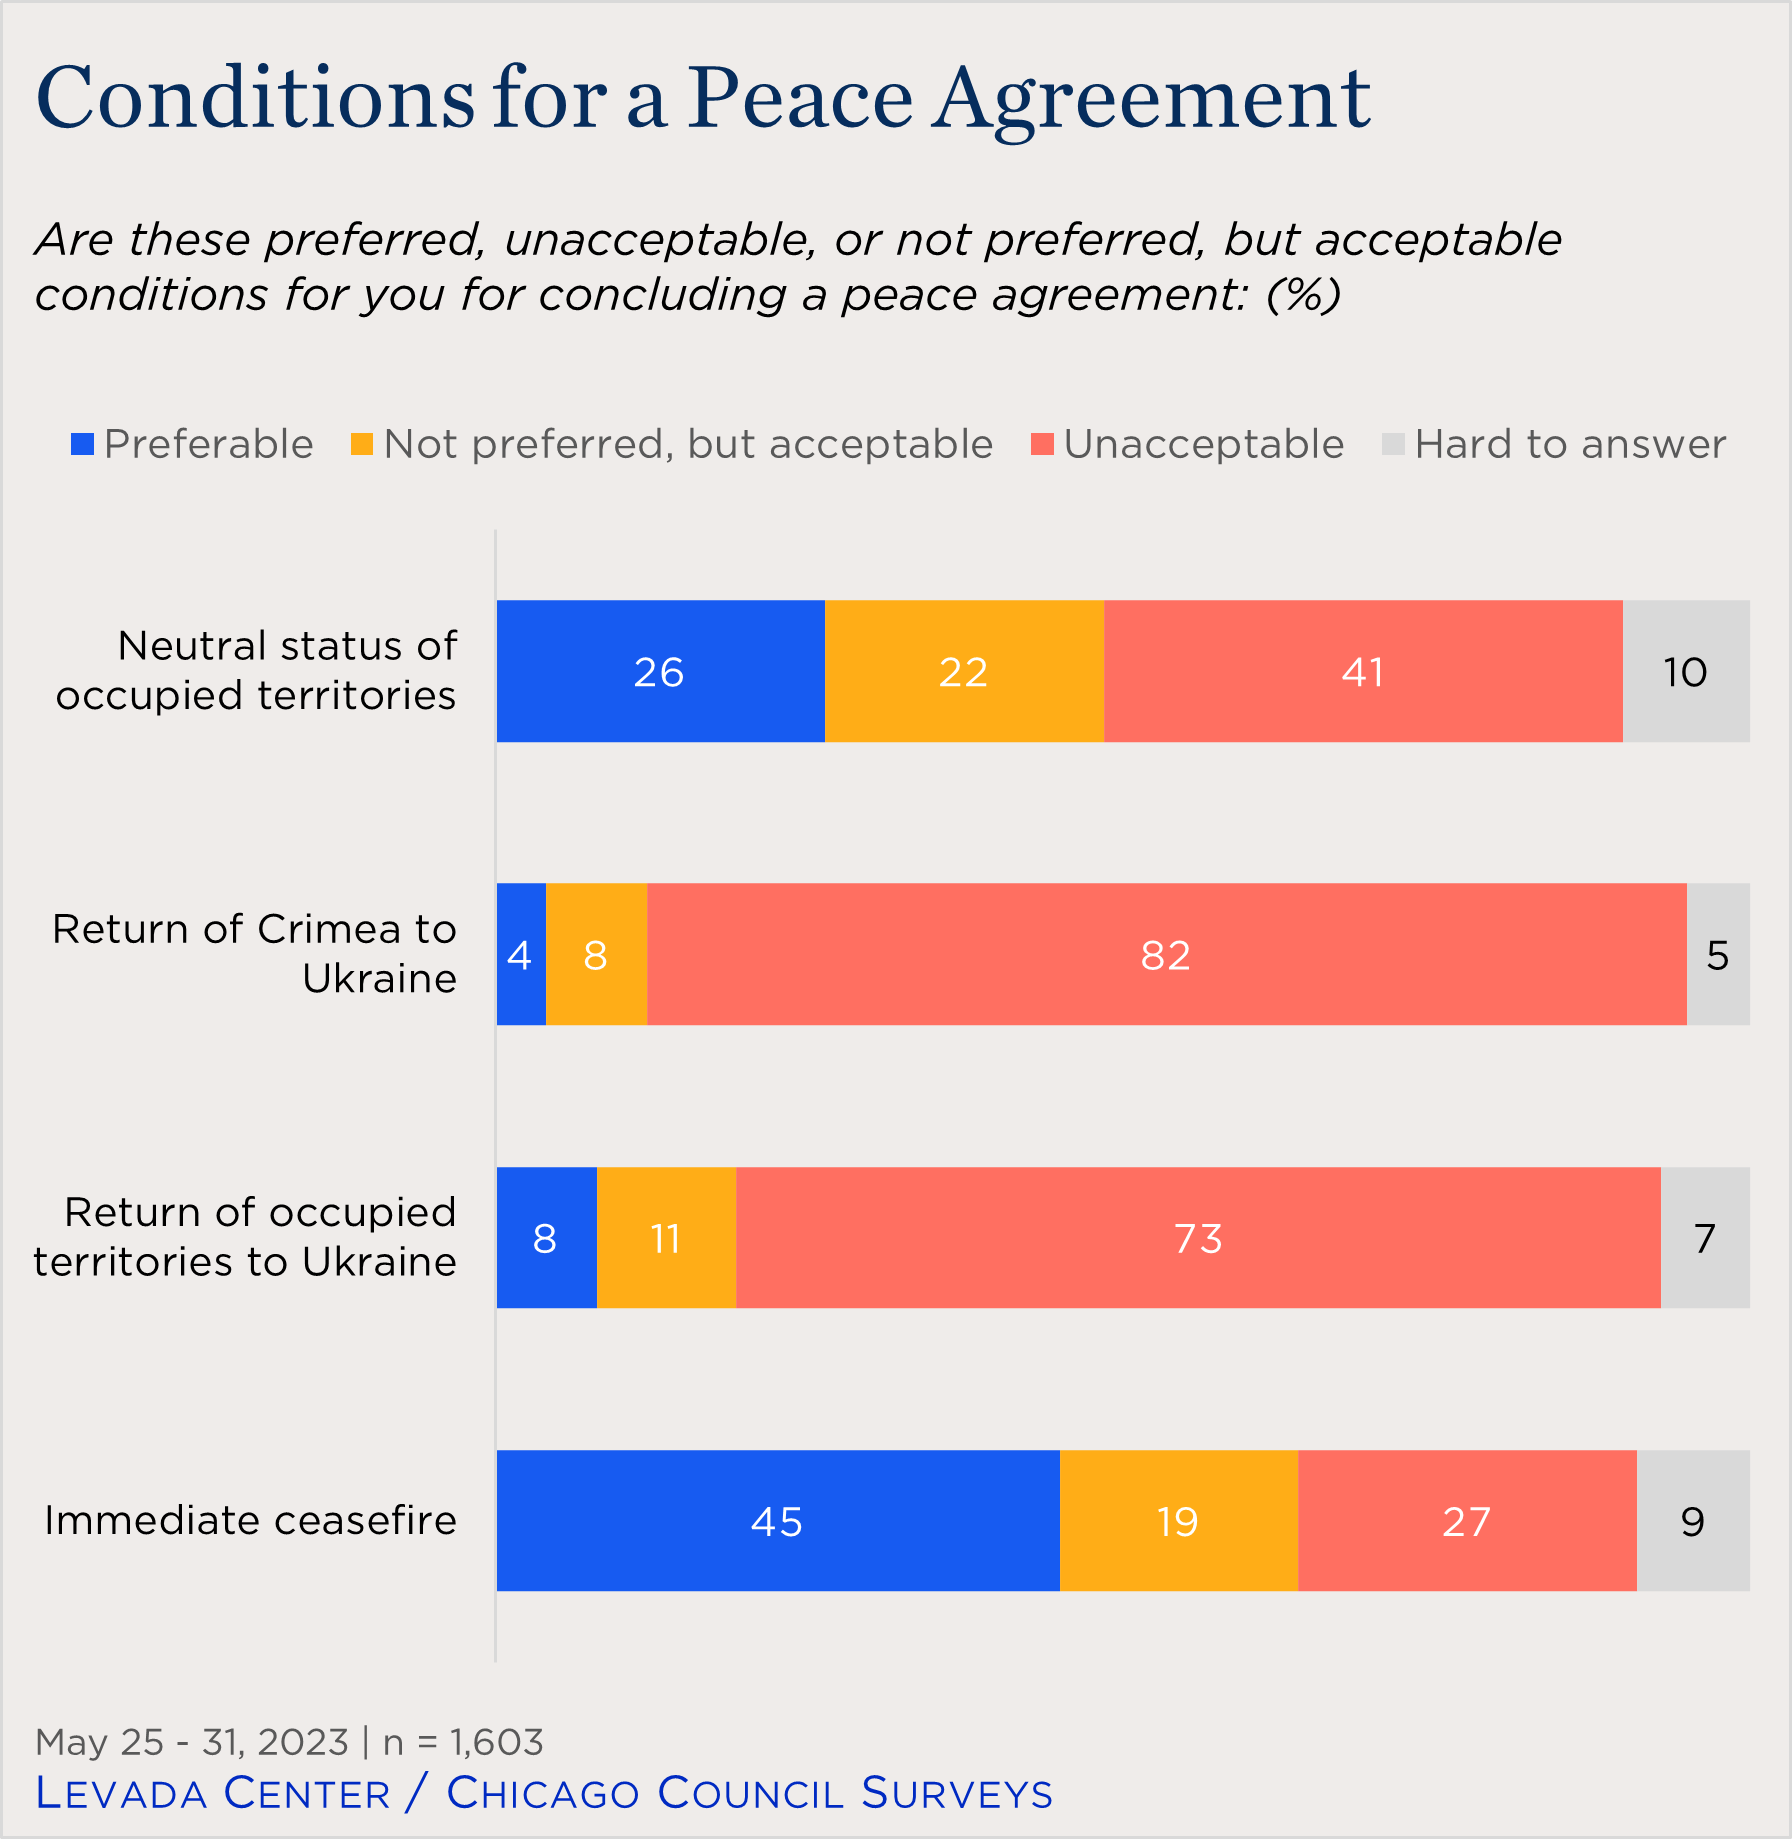 "bar chart showing Russian views on conditions for a peace agreement"